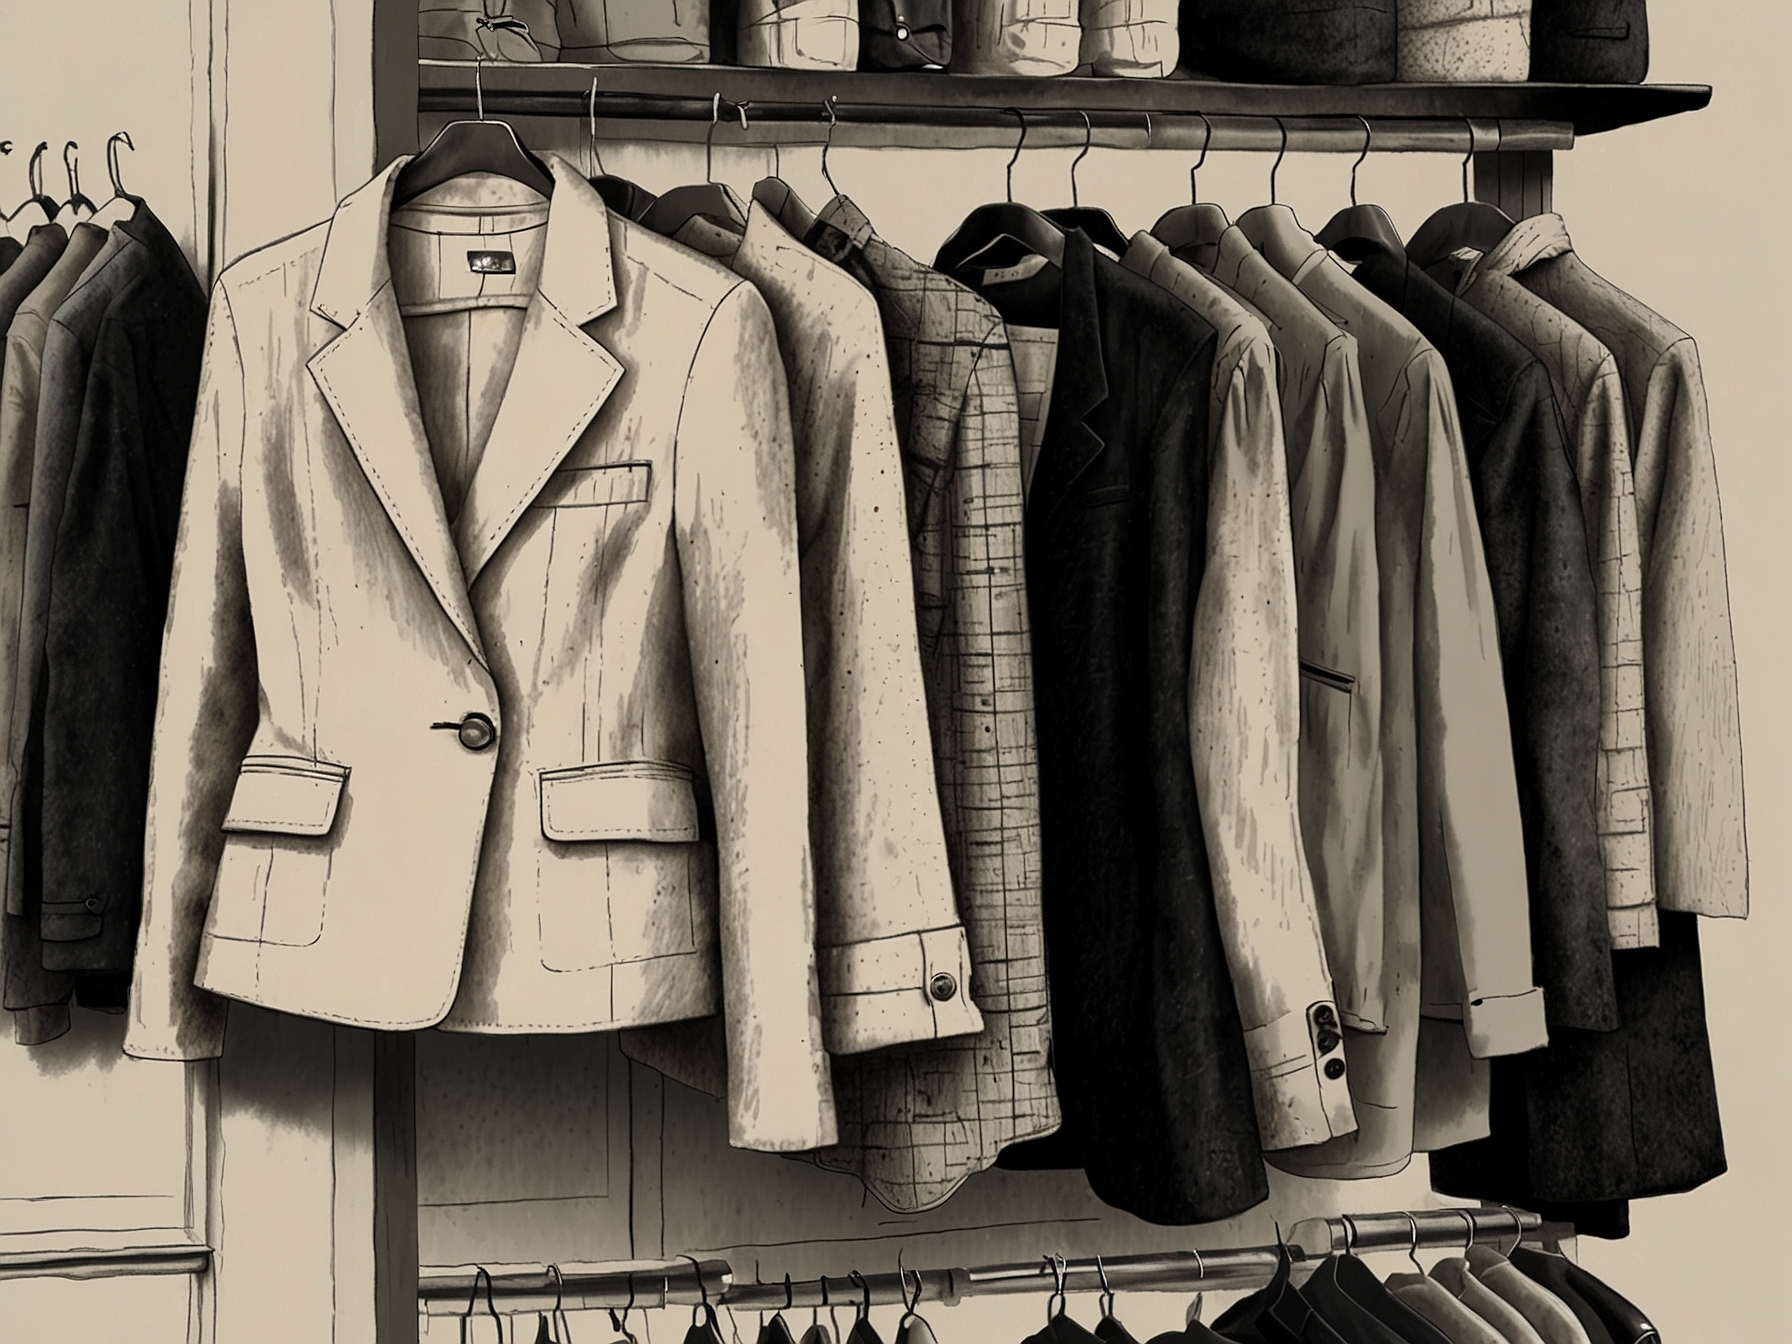 A collection of high-street clothing items including tailored blazers and minimalist dresses, arranged to depict their resemblance to high-end designer pieces from brands like Chanel and The Row.